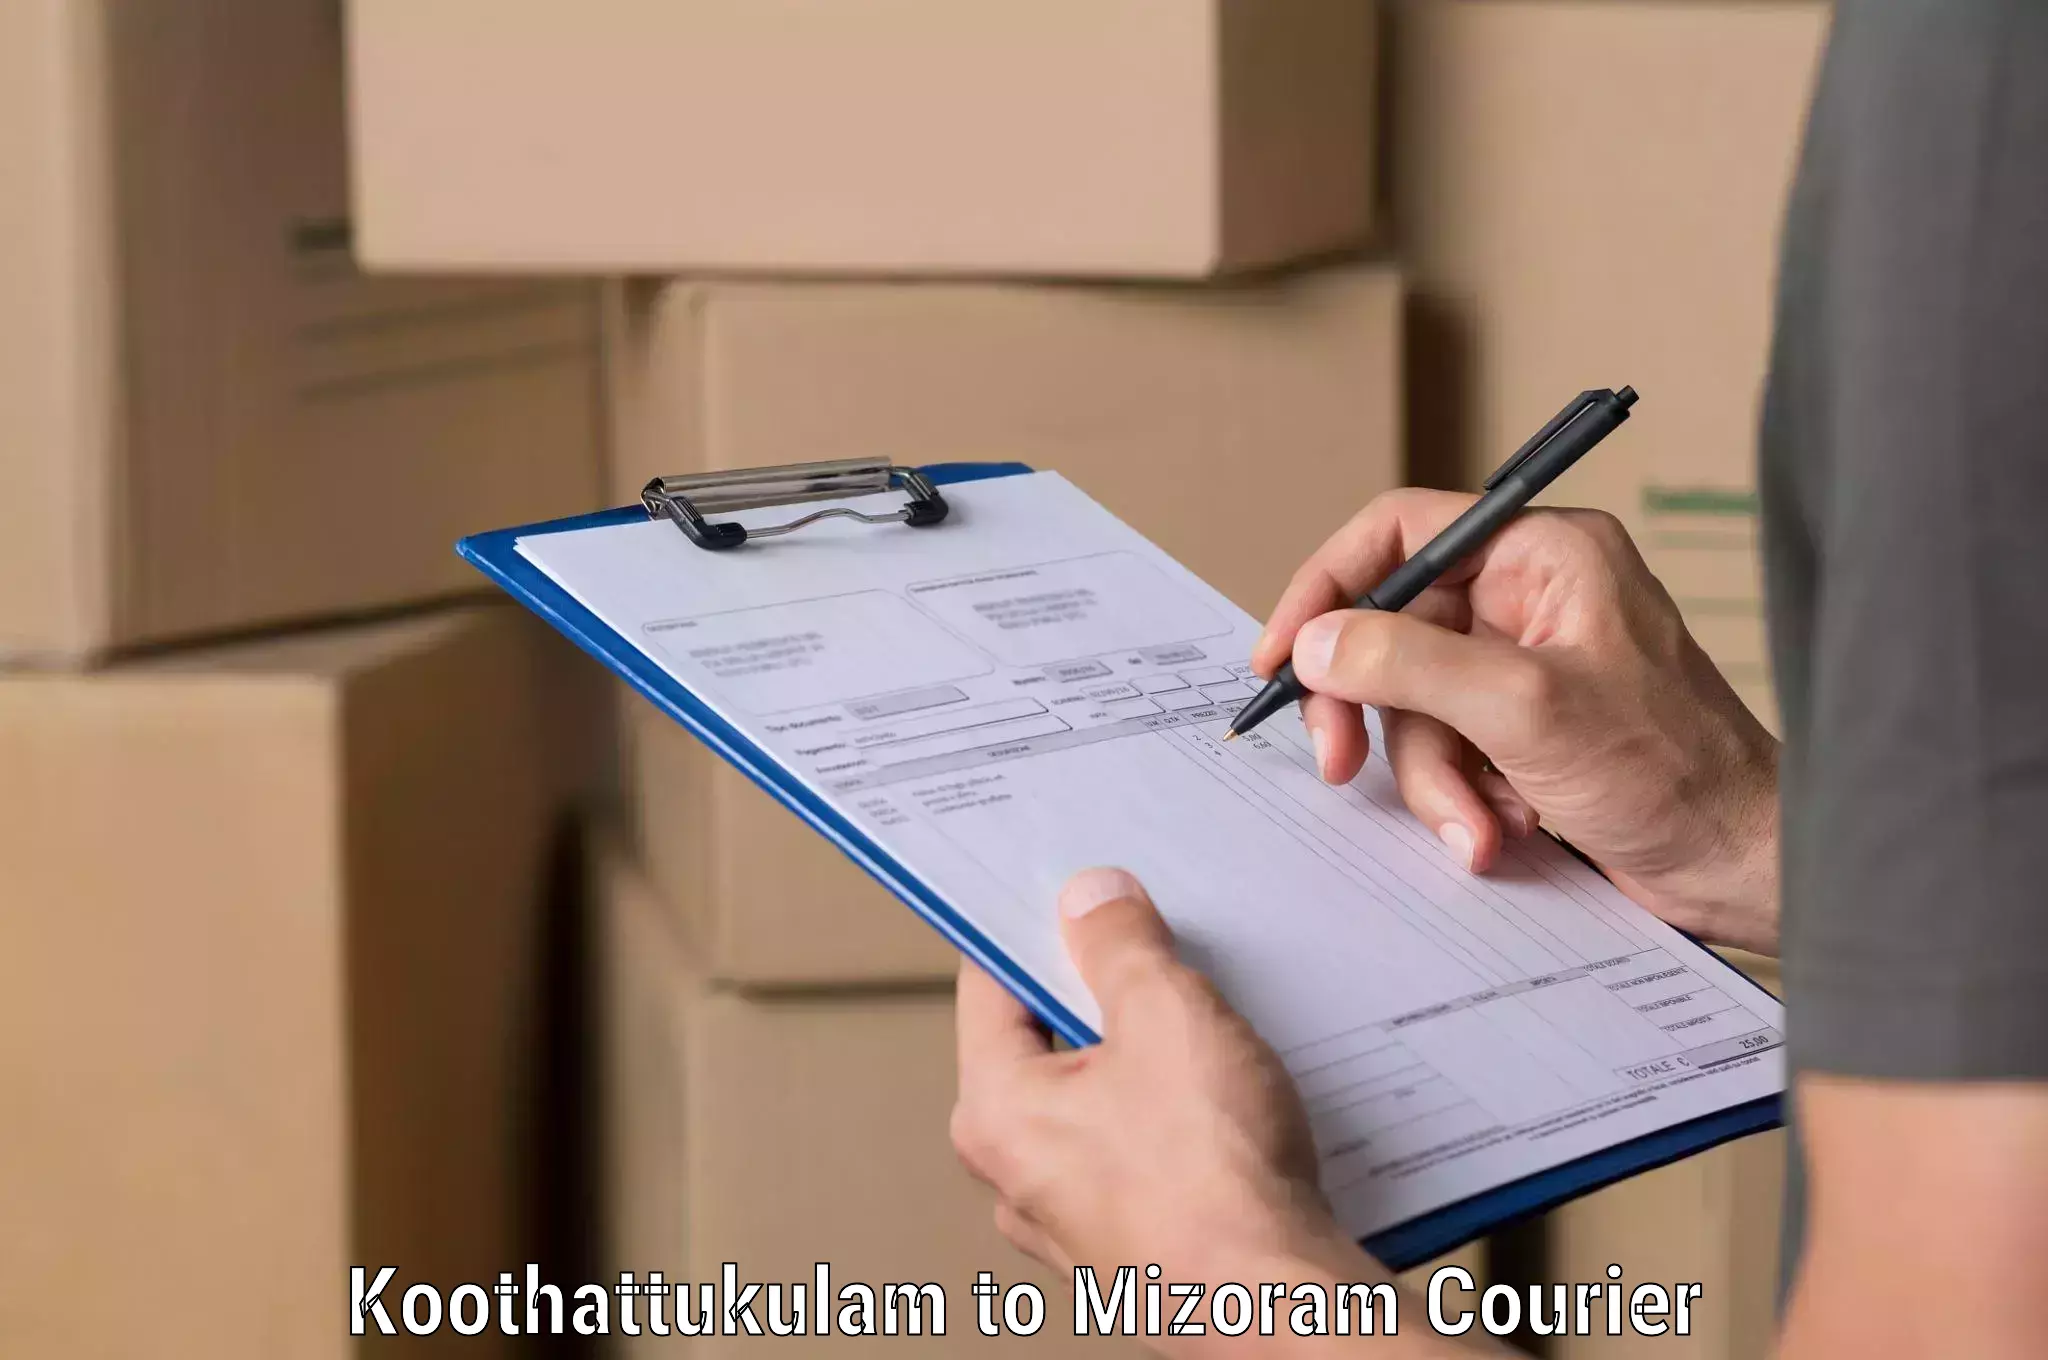 State-of-the-art courier technology Koothattukulam to Darlawn